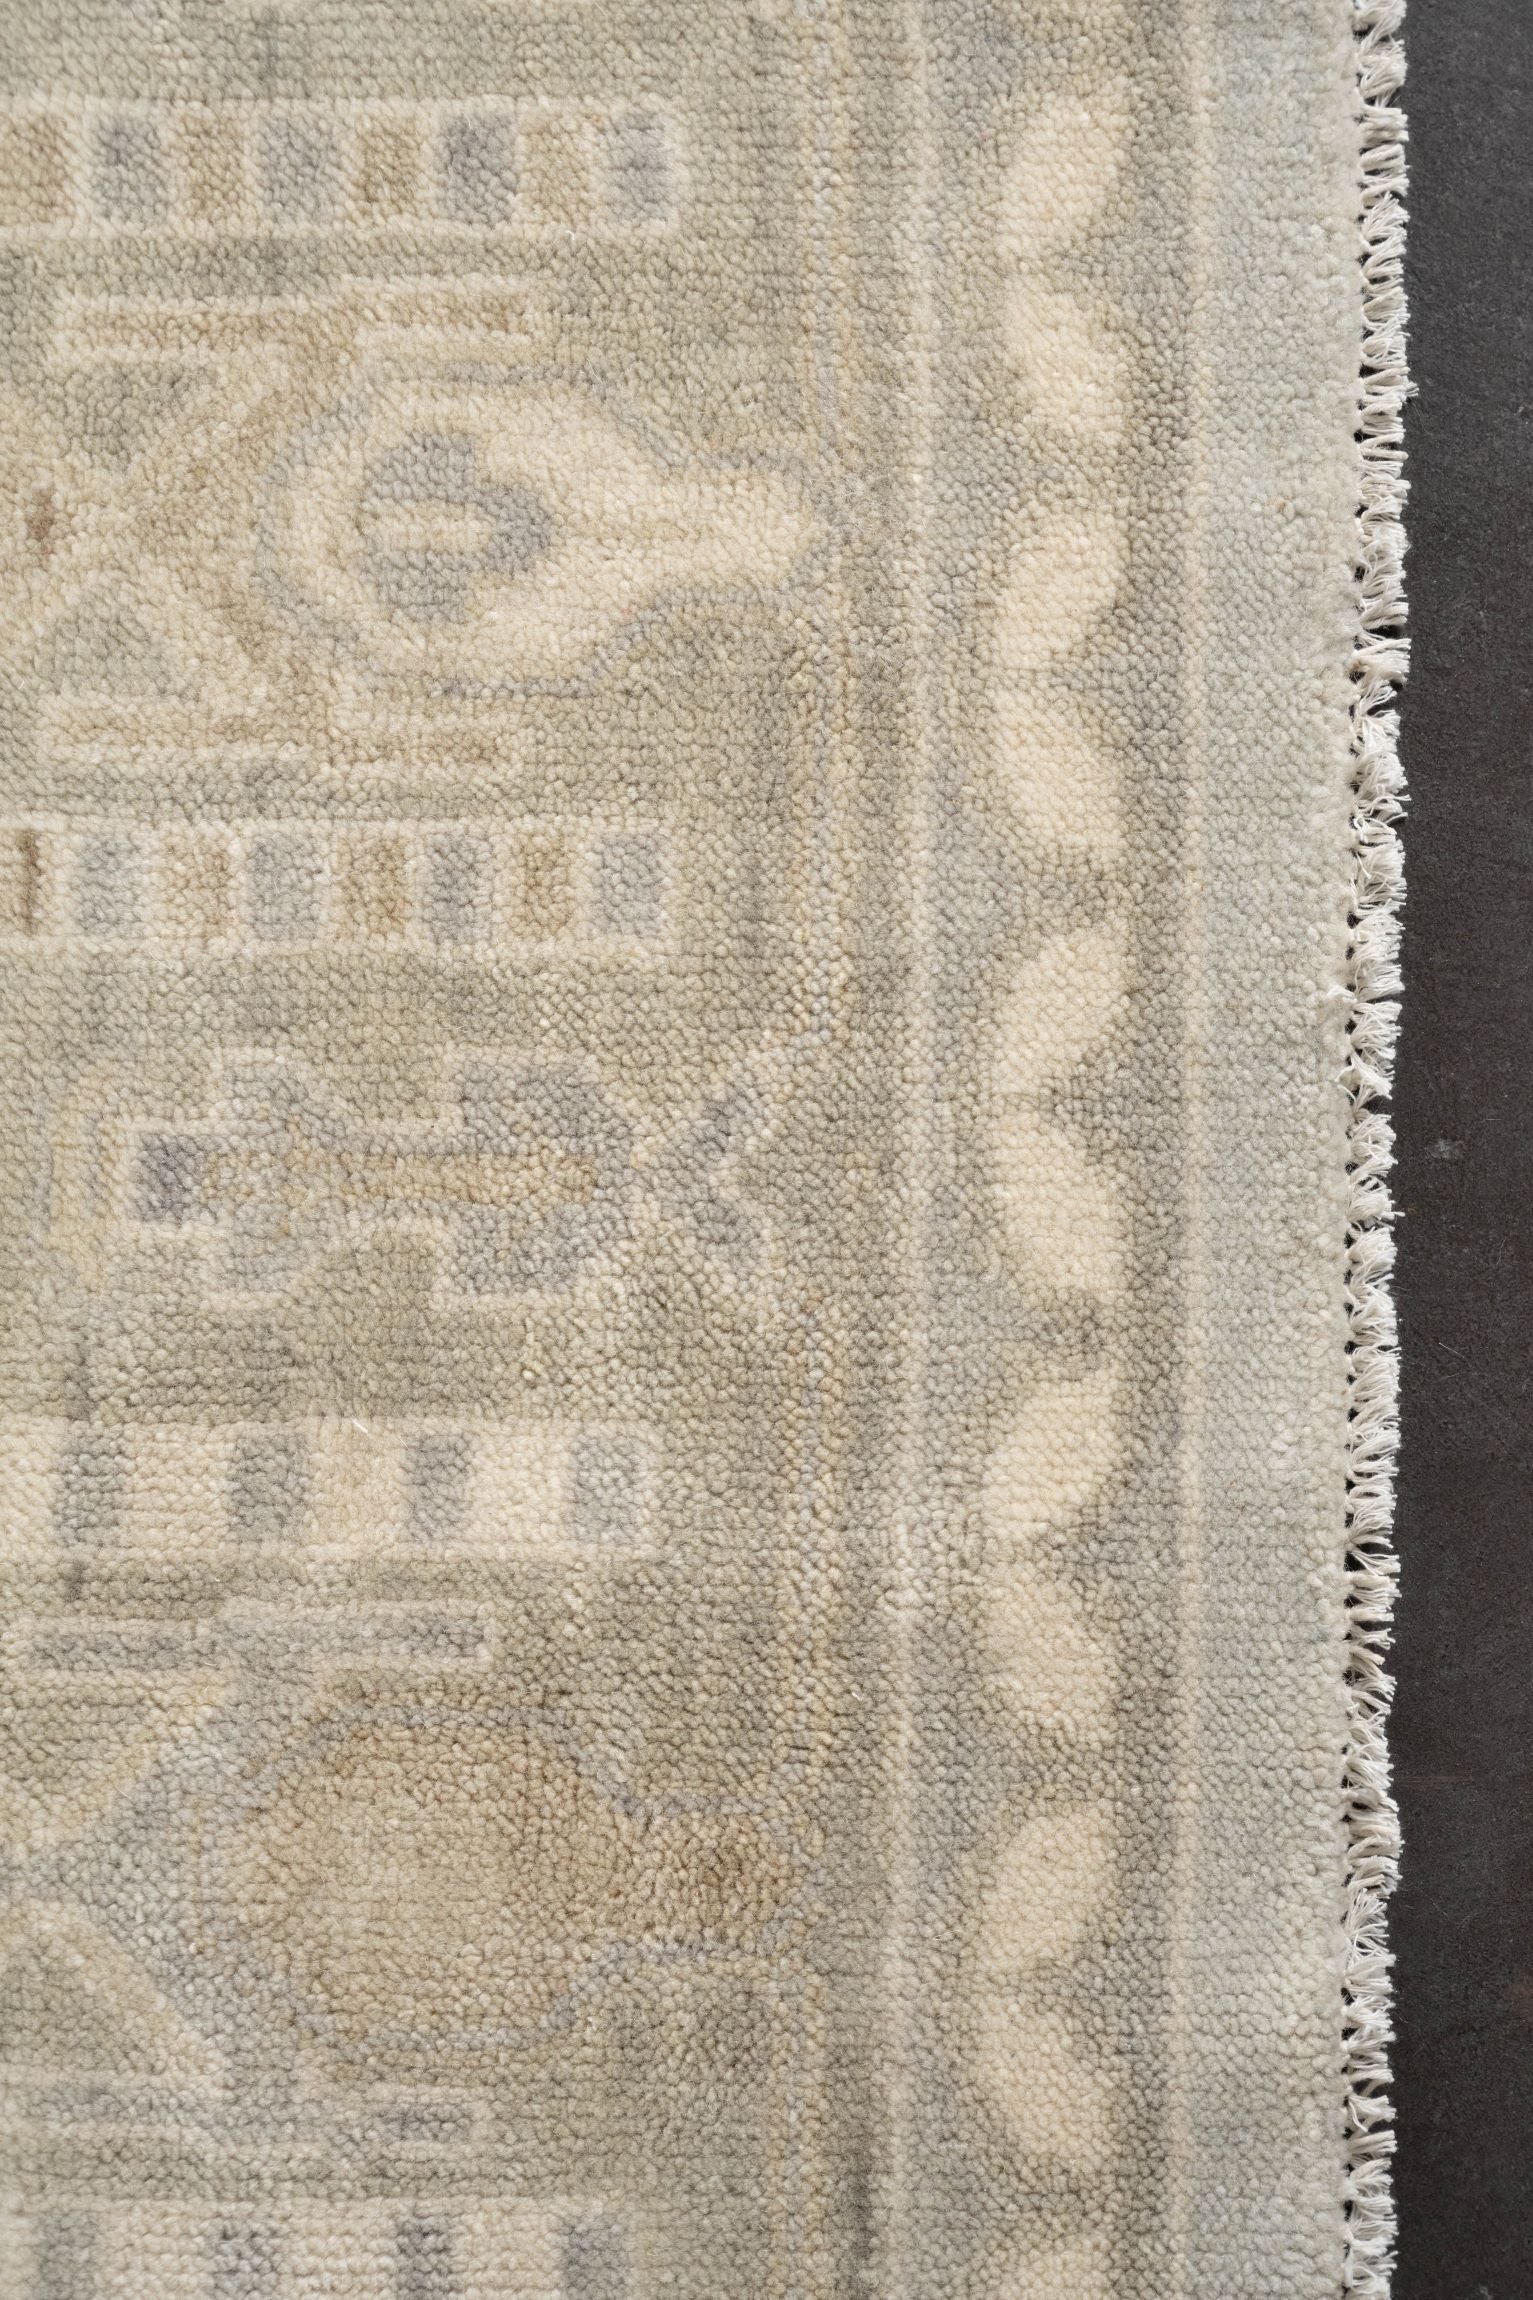 Neutral toned and hand-knotted Oushak style rug made of 100% New Zealand wool. This rug is comprised of tan, beige, brown, ivory, and gray colors.